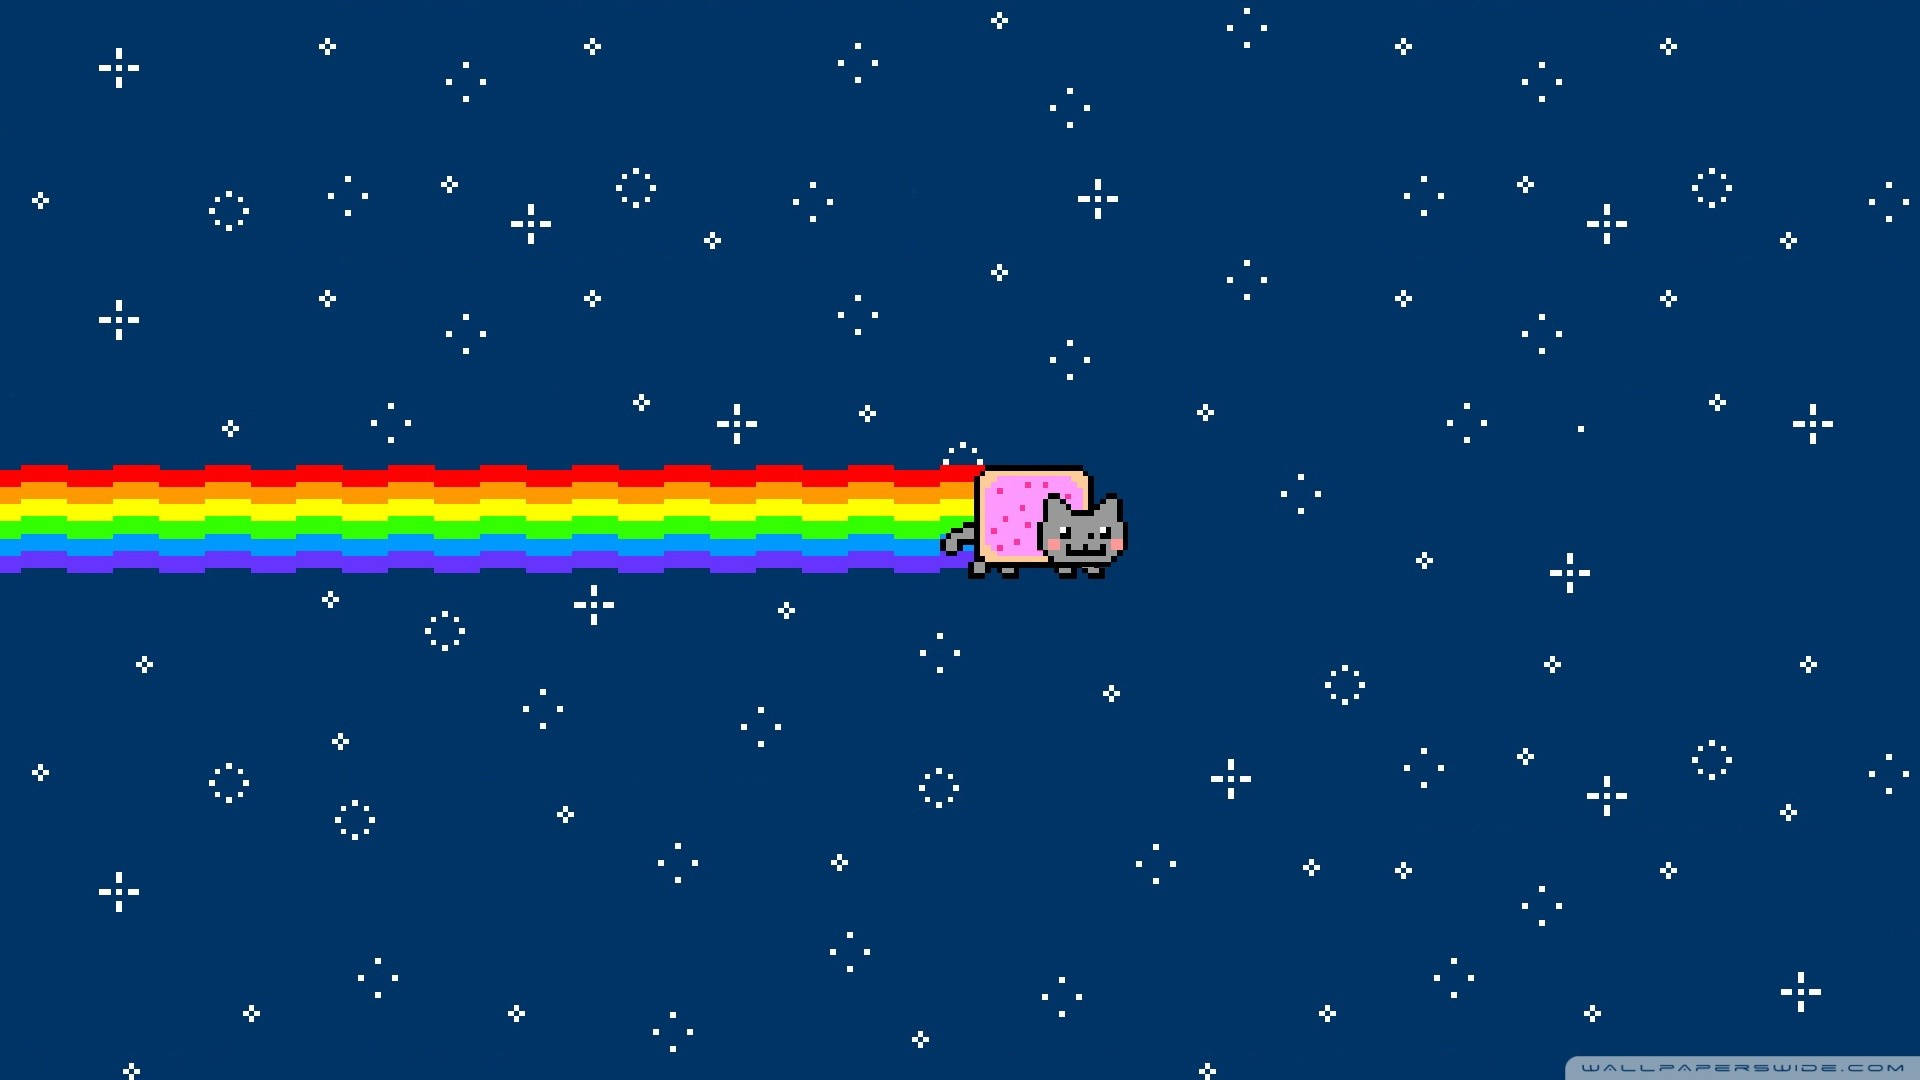 Nyan Cat Flying Through Space Background